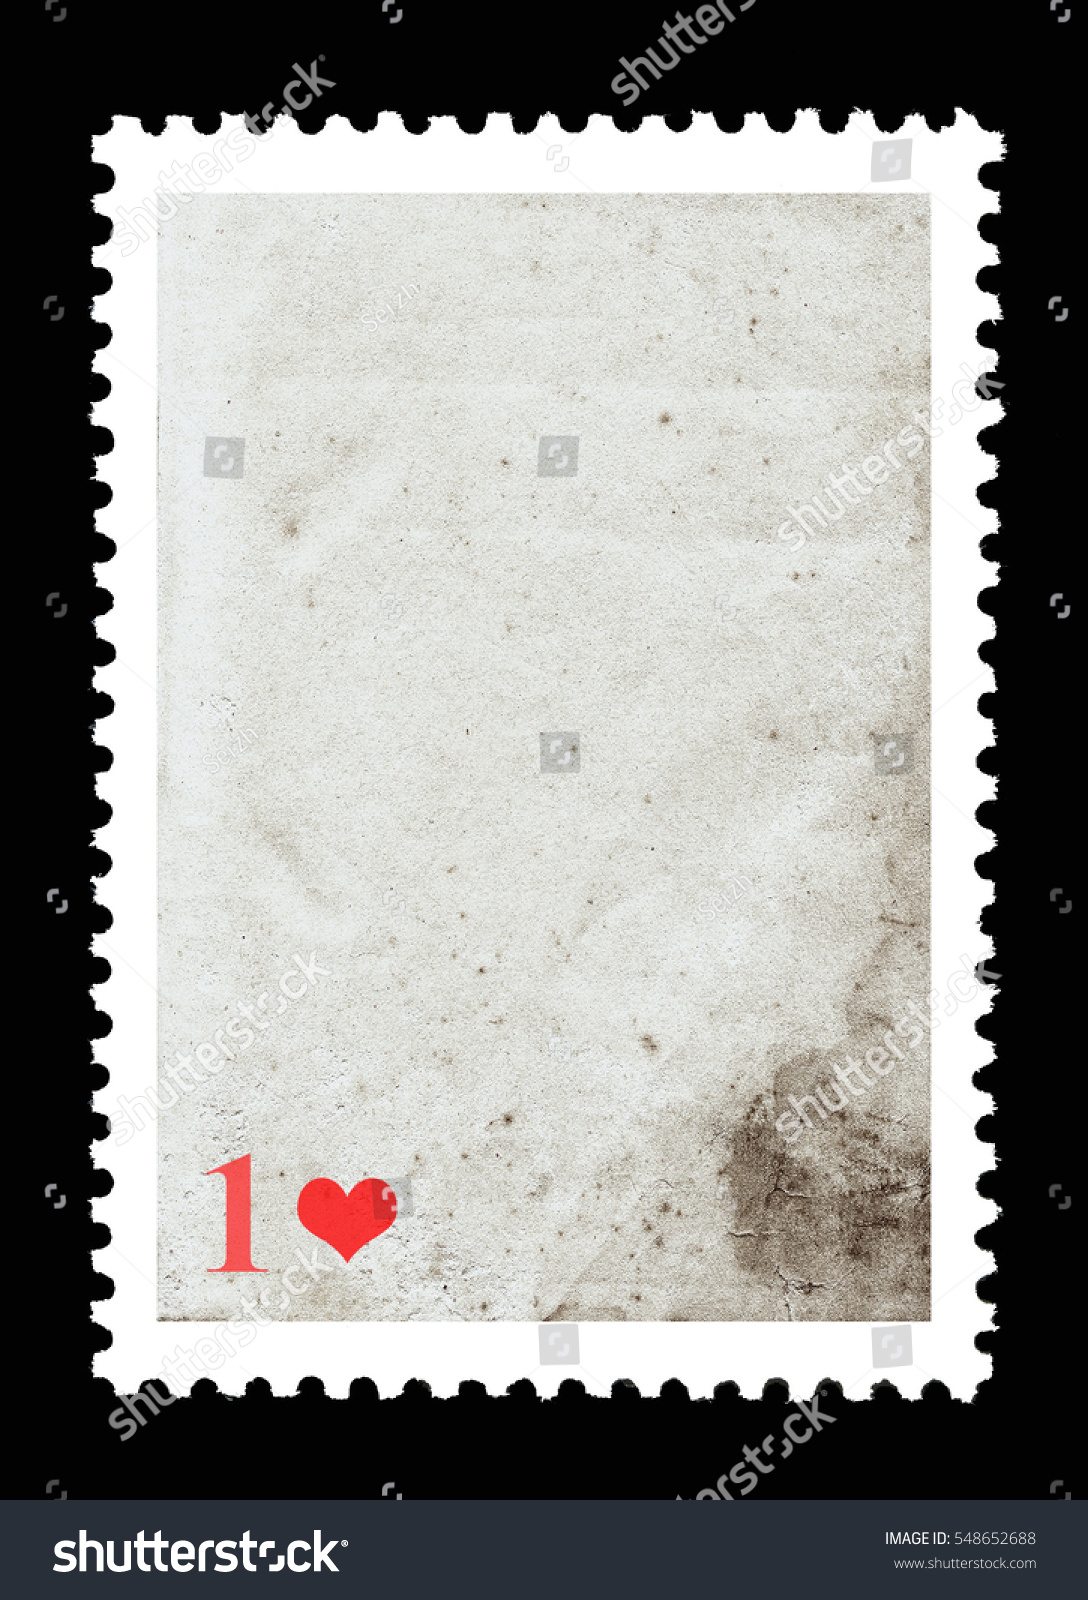 Vintage blank postage stamp and one red heart on a black background. Valentine's Day. #548652688